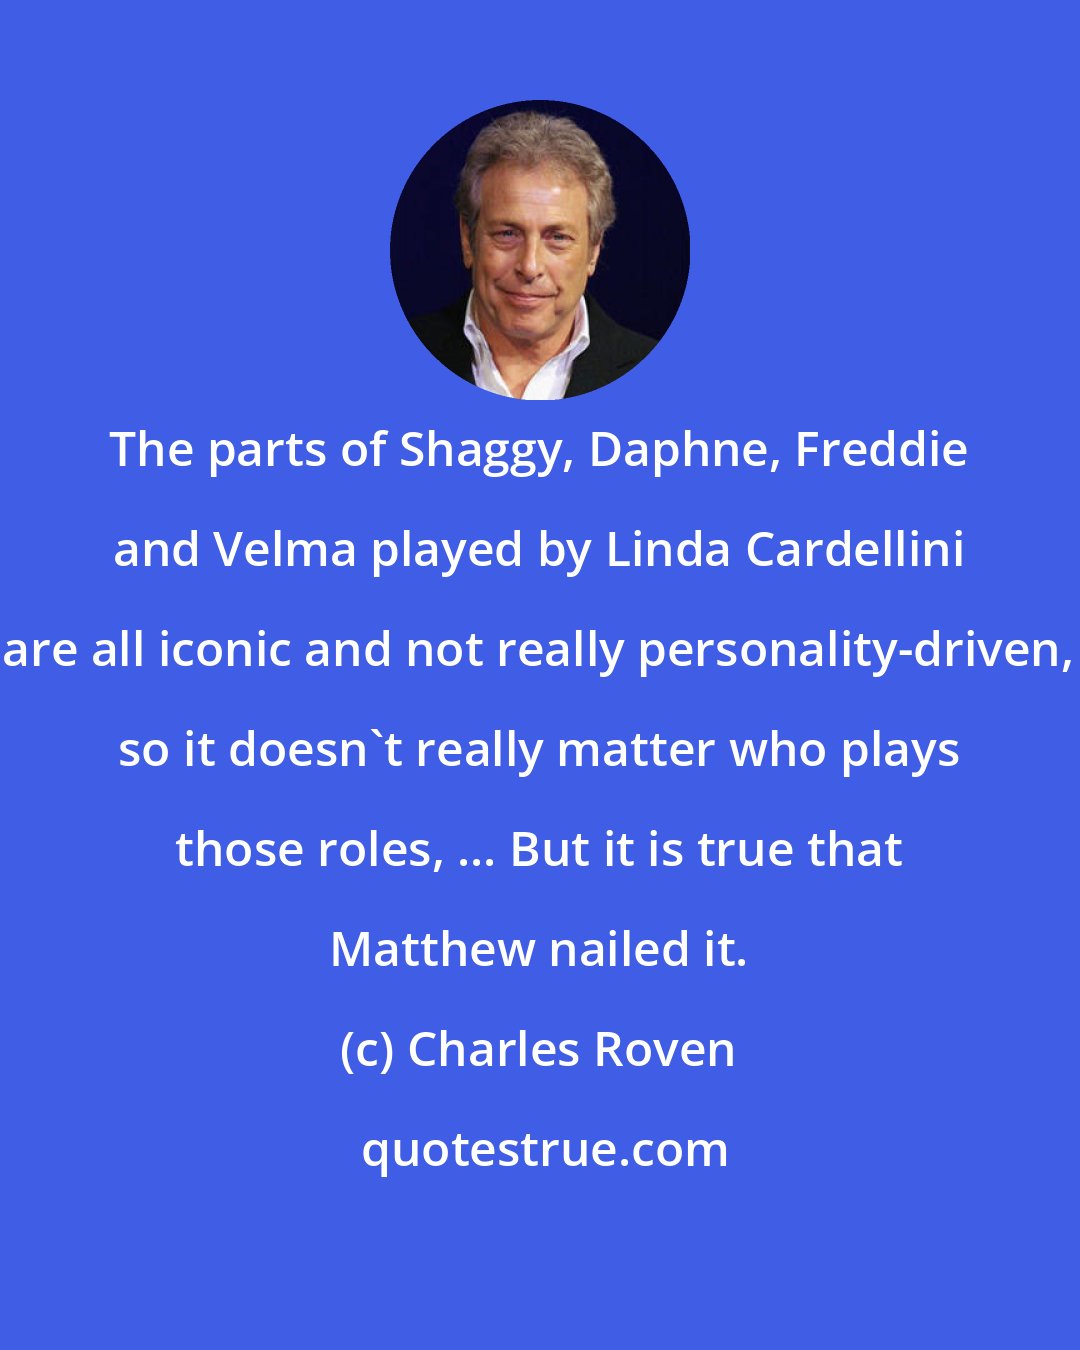 Charles Roven: The parts of Shaggy, Daphne, Freddie and Velma played by Linda Cardellini are all iconic and not really personality-driven, so it doesn't really matter who plays those roles, ... But it is true that Matthew nailed it.